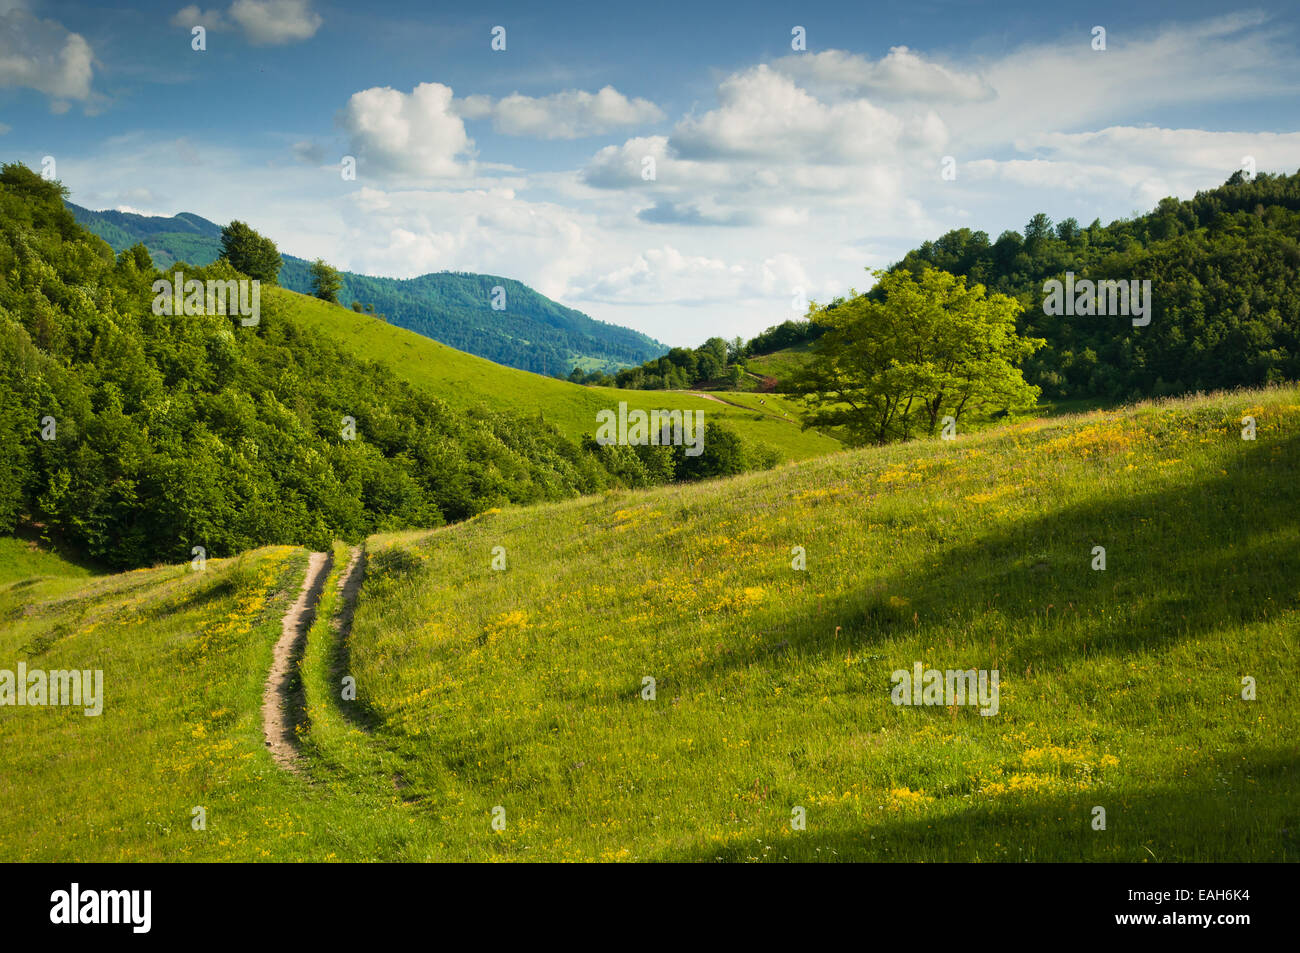 Photo of a rural, medium altitude landscape, taken during a sunny spring day. Stock Photo